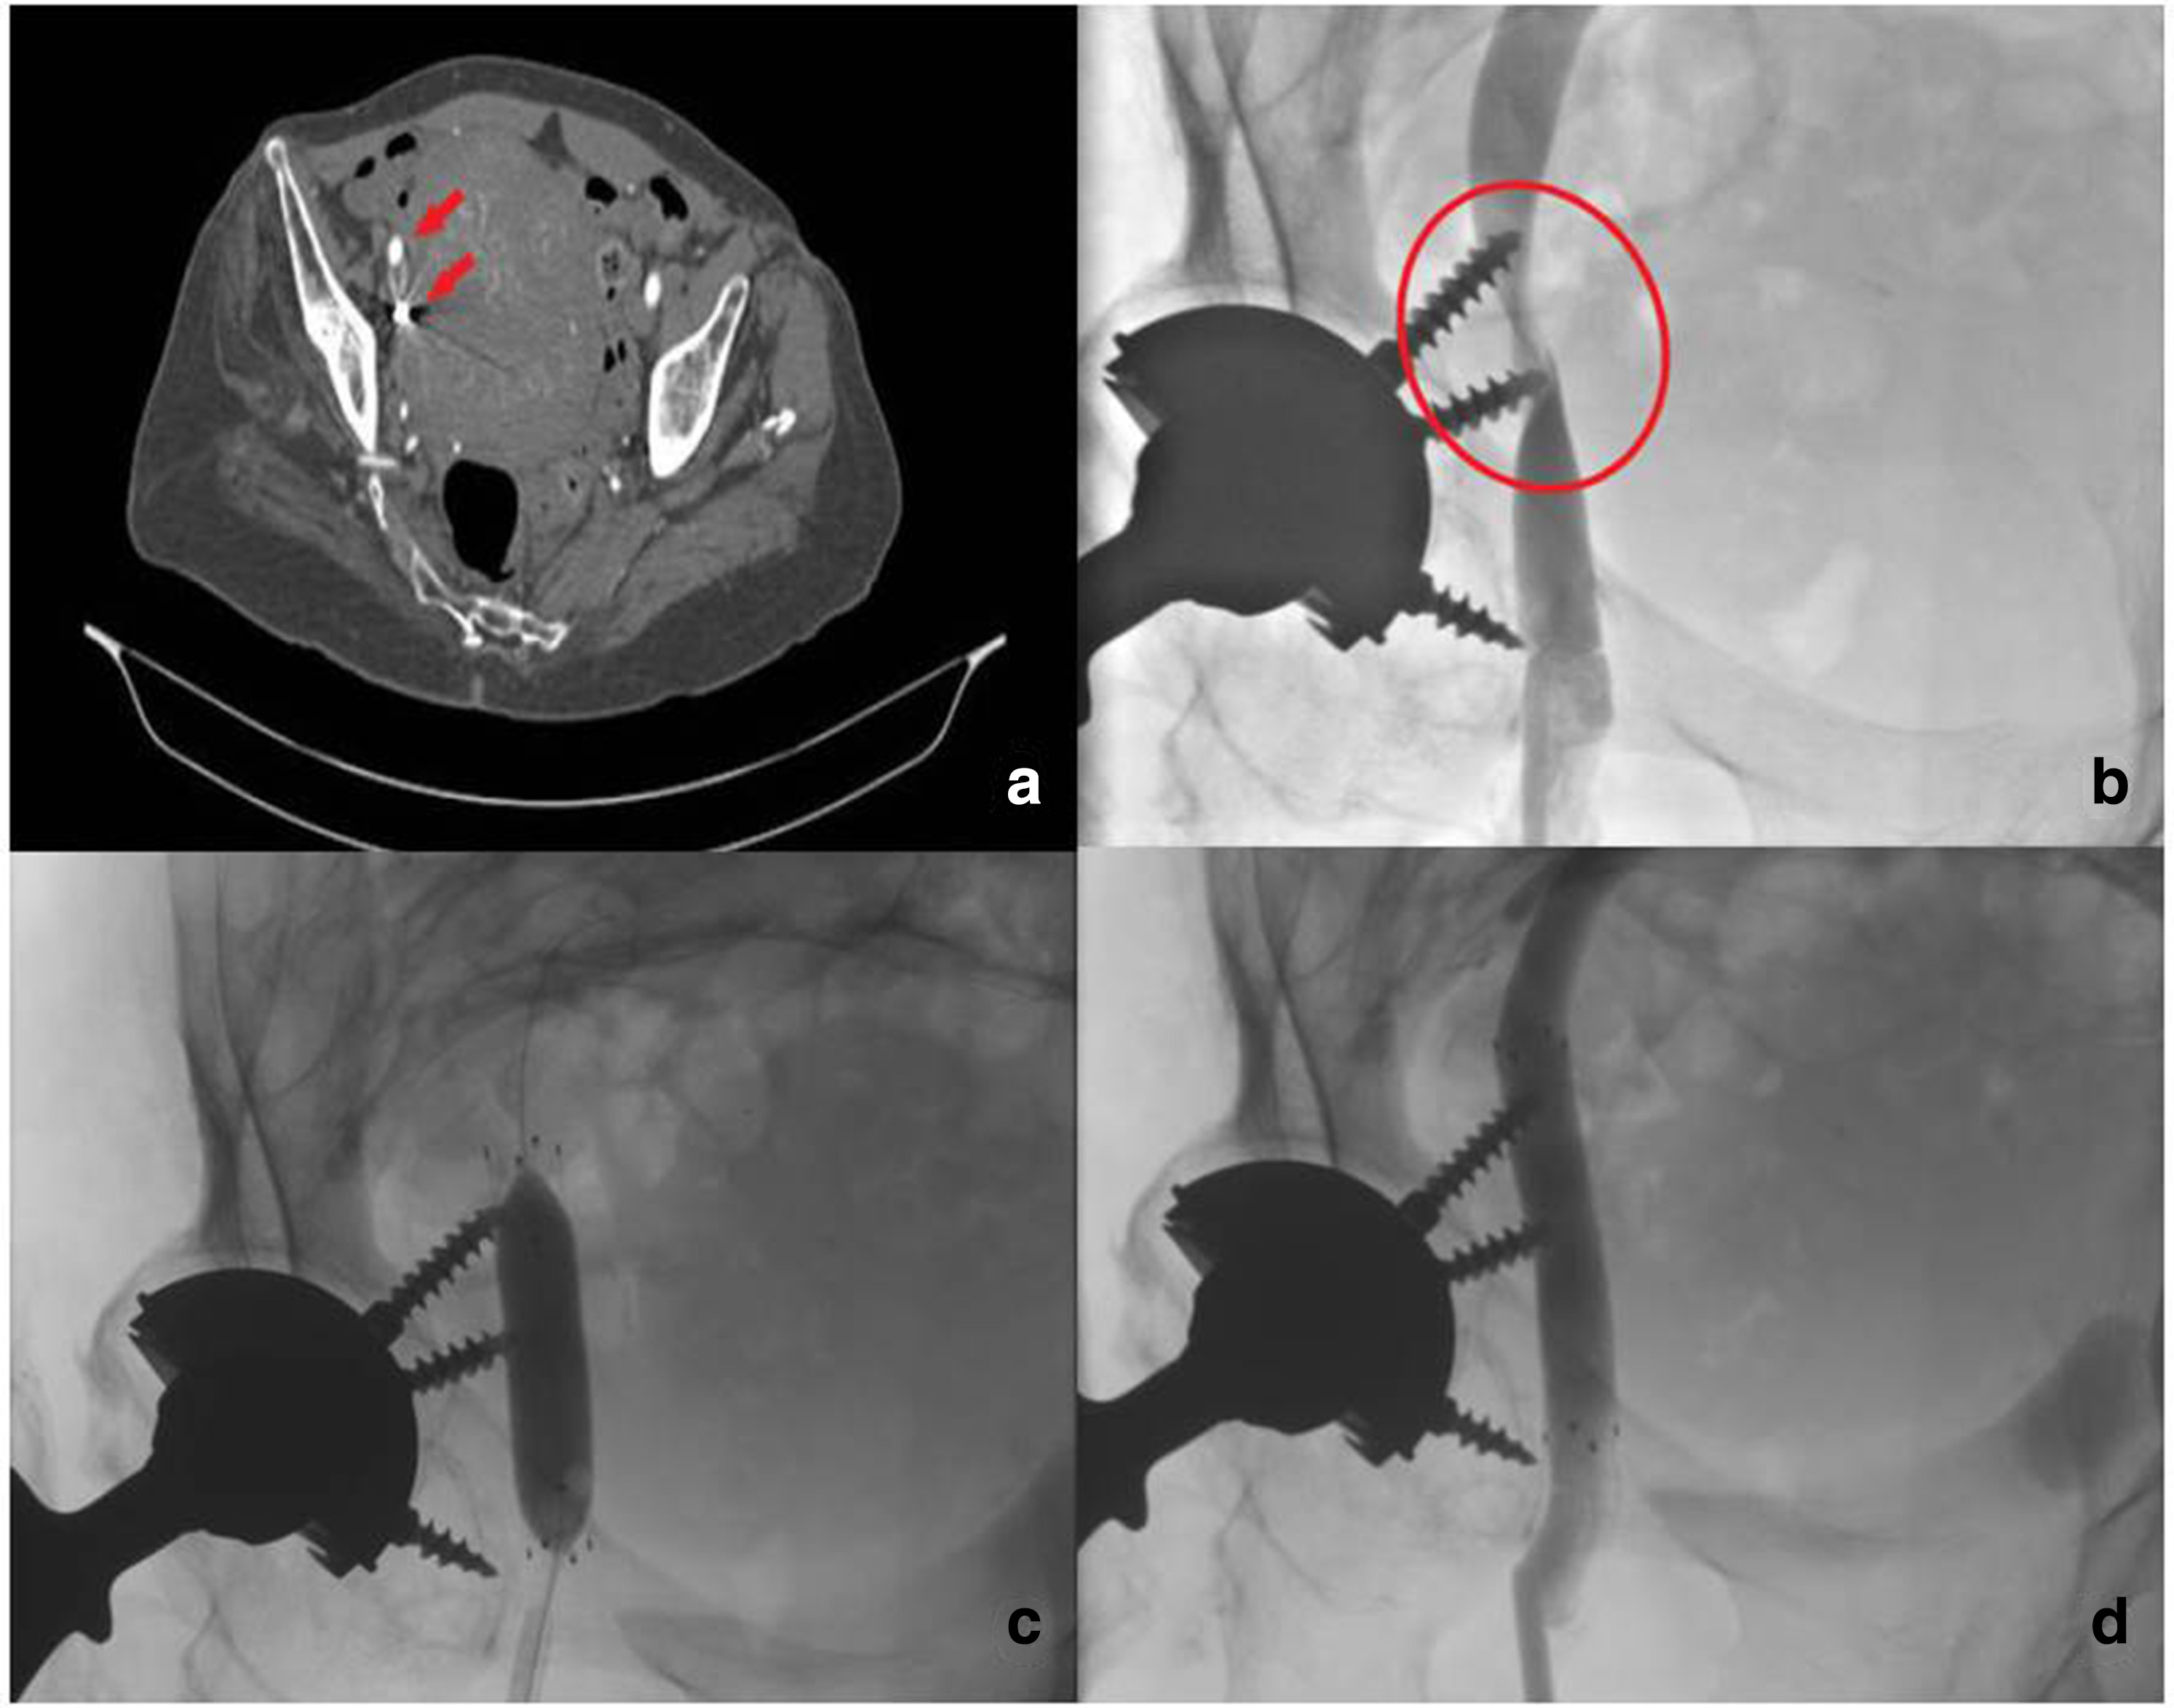 Fig. 4 
          a) CT pelvis showing intrapelvic screws (red arrows) on the right side.b) Venography demonstrating iliac external vein stenosis caused by screws. c) Venography showing balloon at the stenosis site.d) Venography after stent insertion. The image shows the full flow in iliac external vein. The patient was prescribed dual antiplatelet therapy with 100 mg of aspirin and 75 mg of clopidogrel daily for four weeks since the literature suggests that this a critical period o for early stent occlusion. Before surgery, antiplatelets were suspended one week before the planned surgery.
        